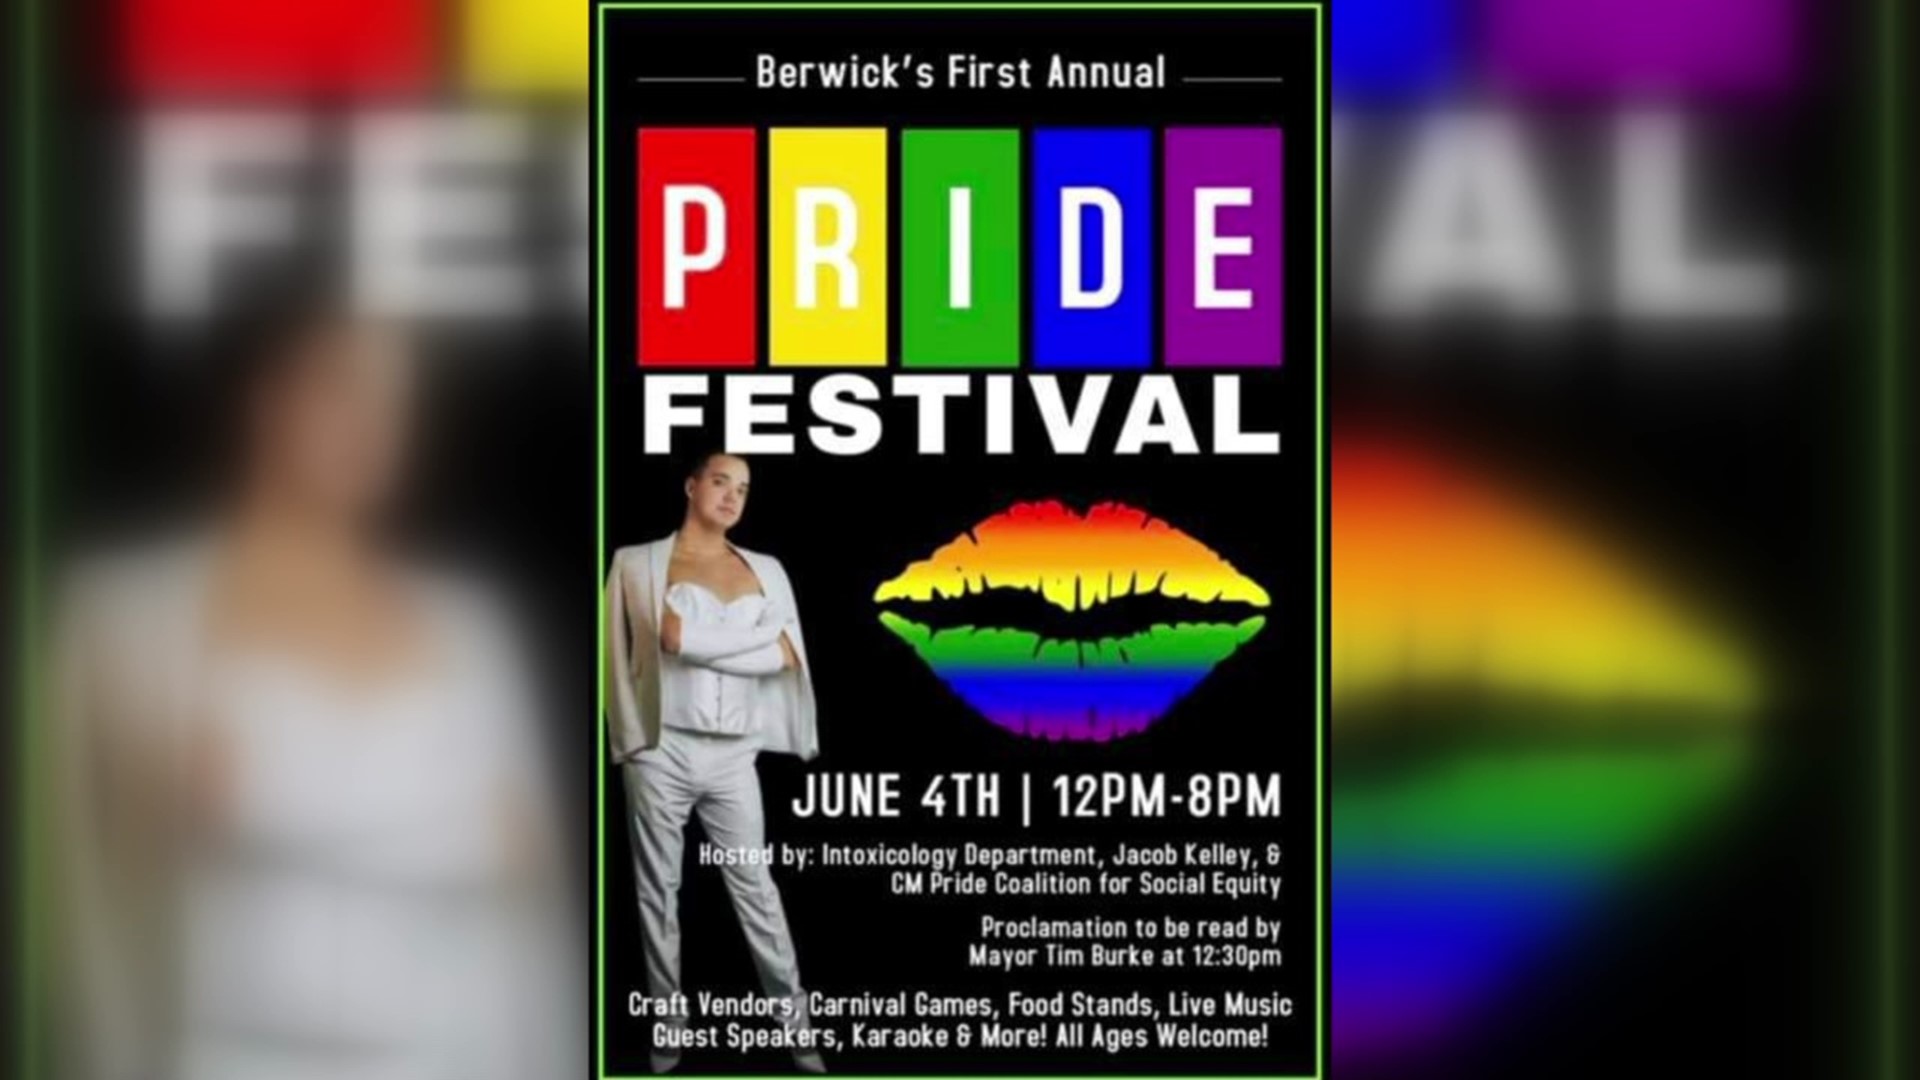 June is Pride Month, a time to celebrate the LGBTQ community.  Berwick is doing that this weekend by holding its first Pride event.